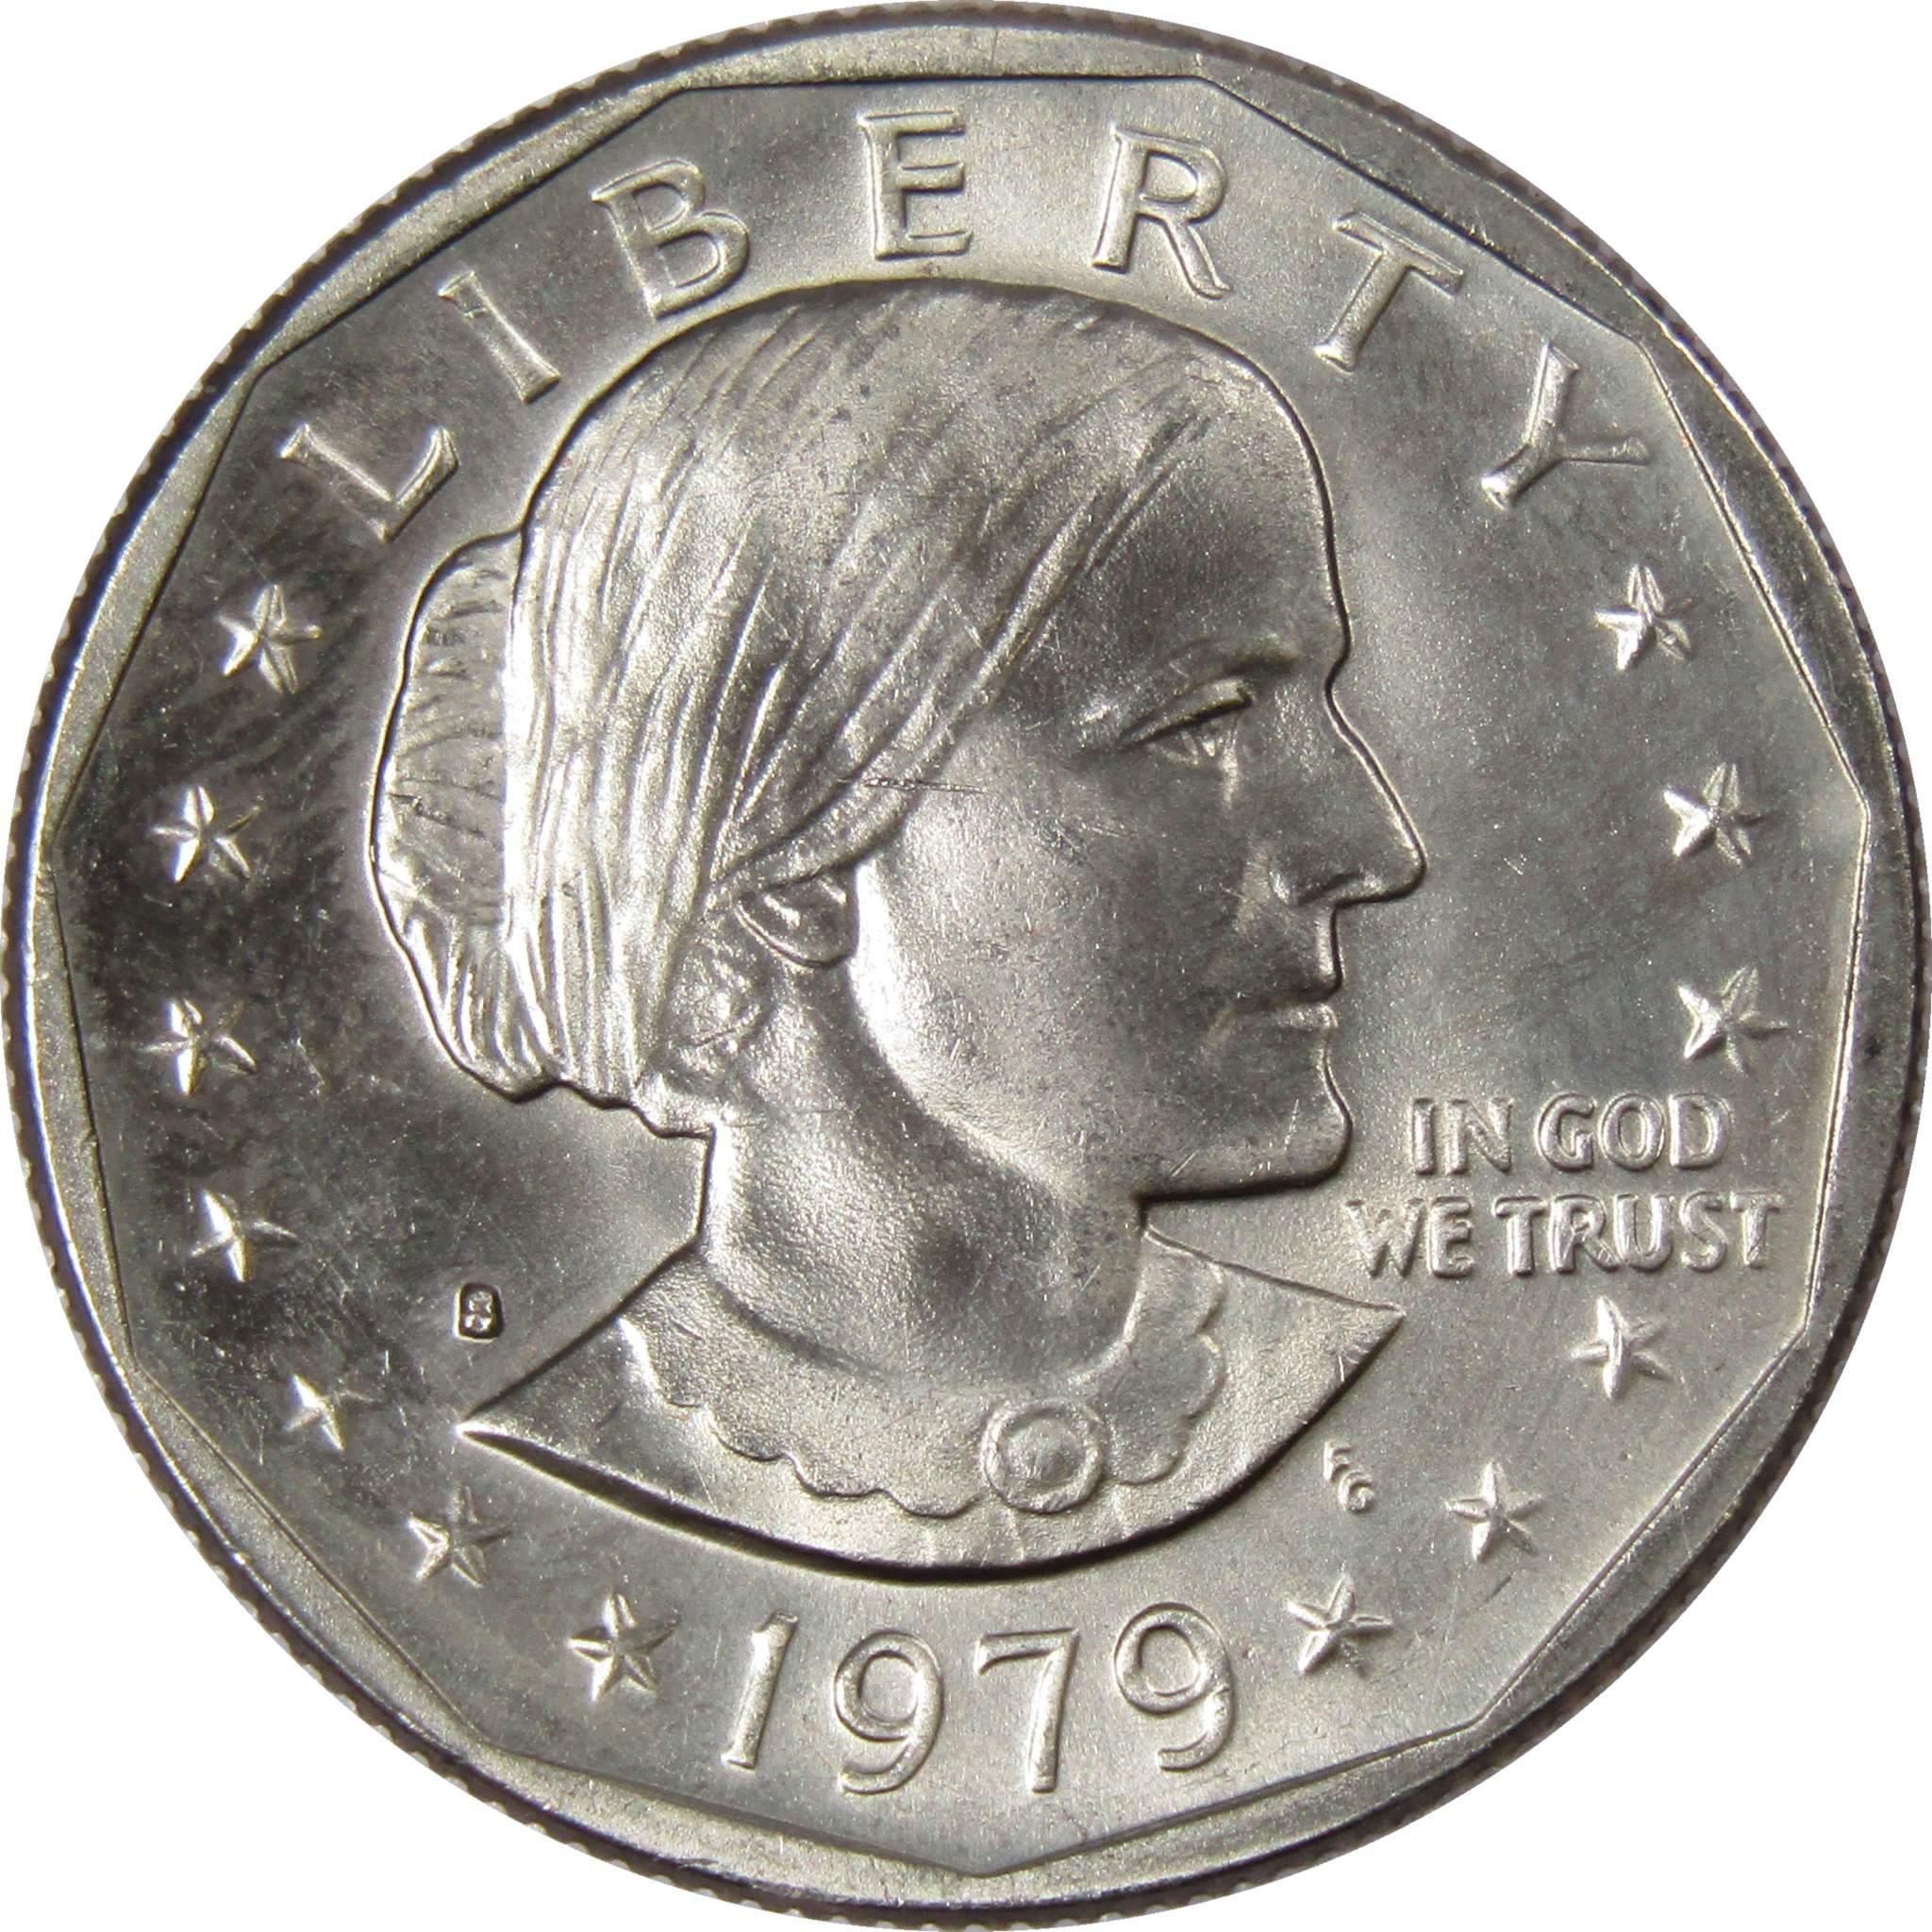 1979 S Susan B Anthony Dollar BU Uncirculated Mint State SBA $1 US Coin